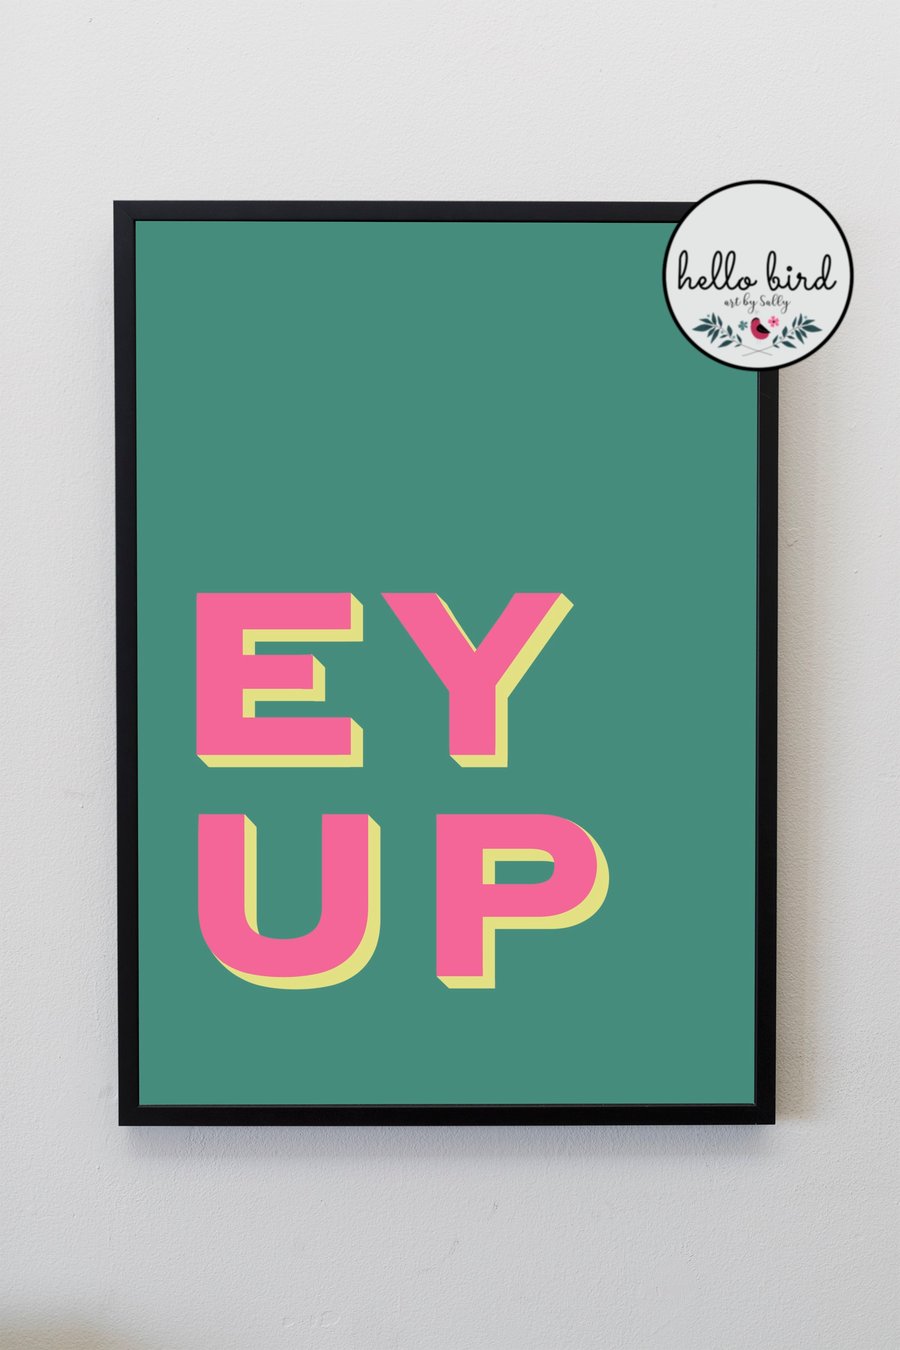 Yorkshire Dialect Print - Ey Up (Green)